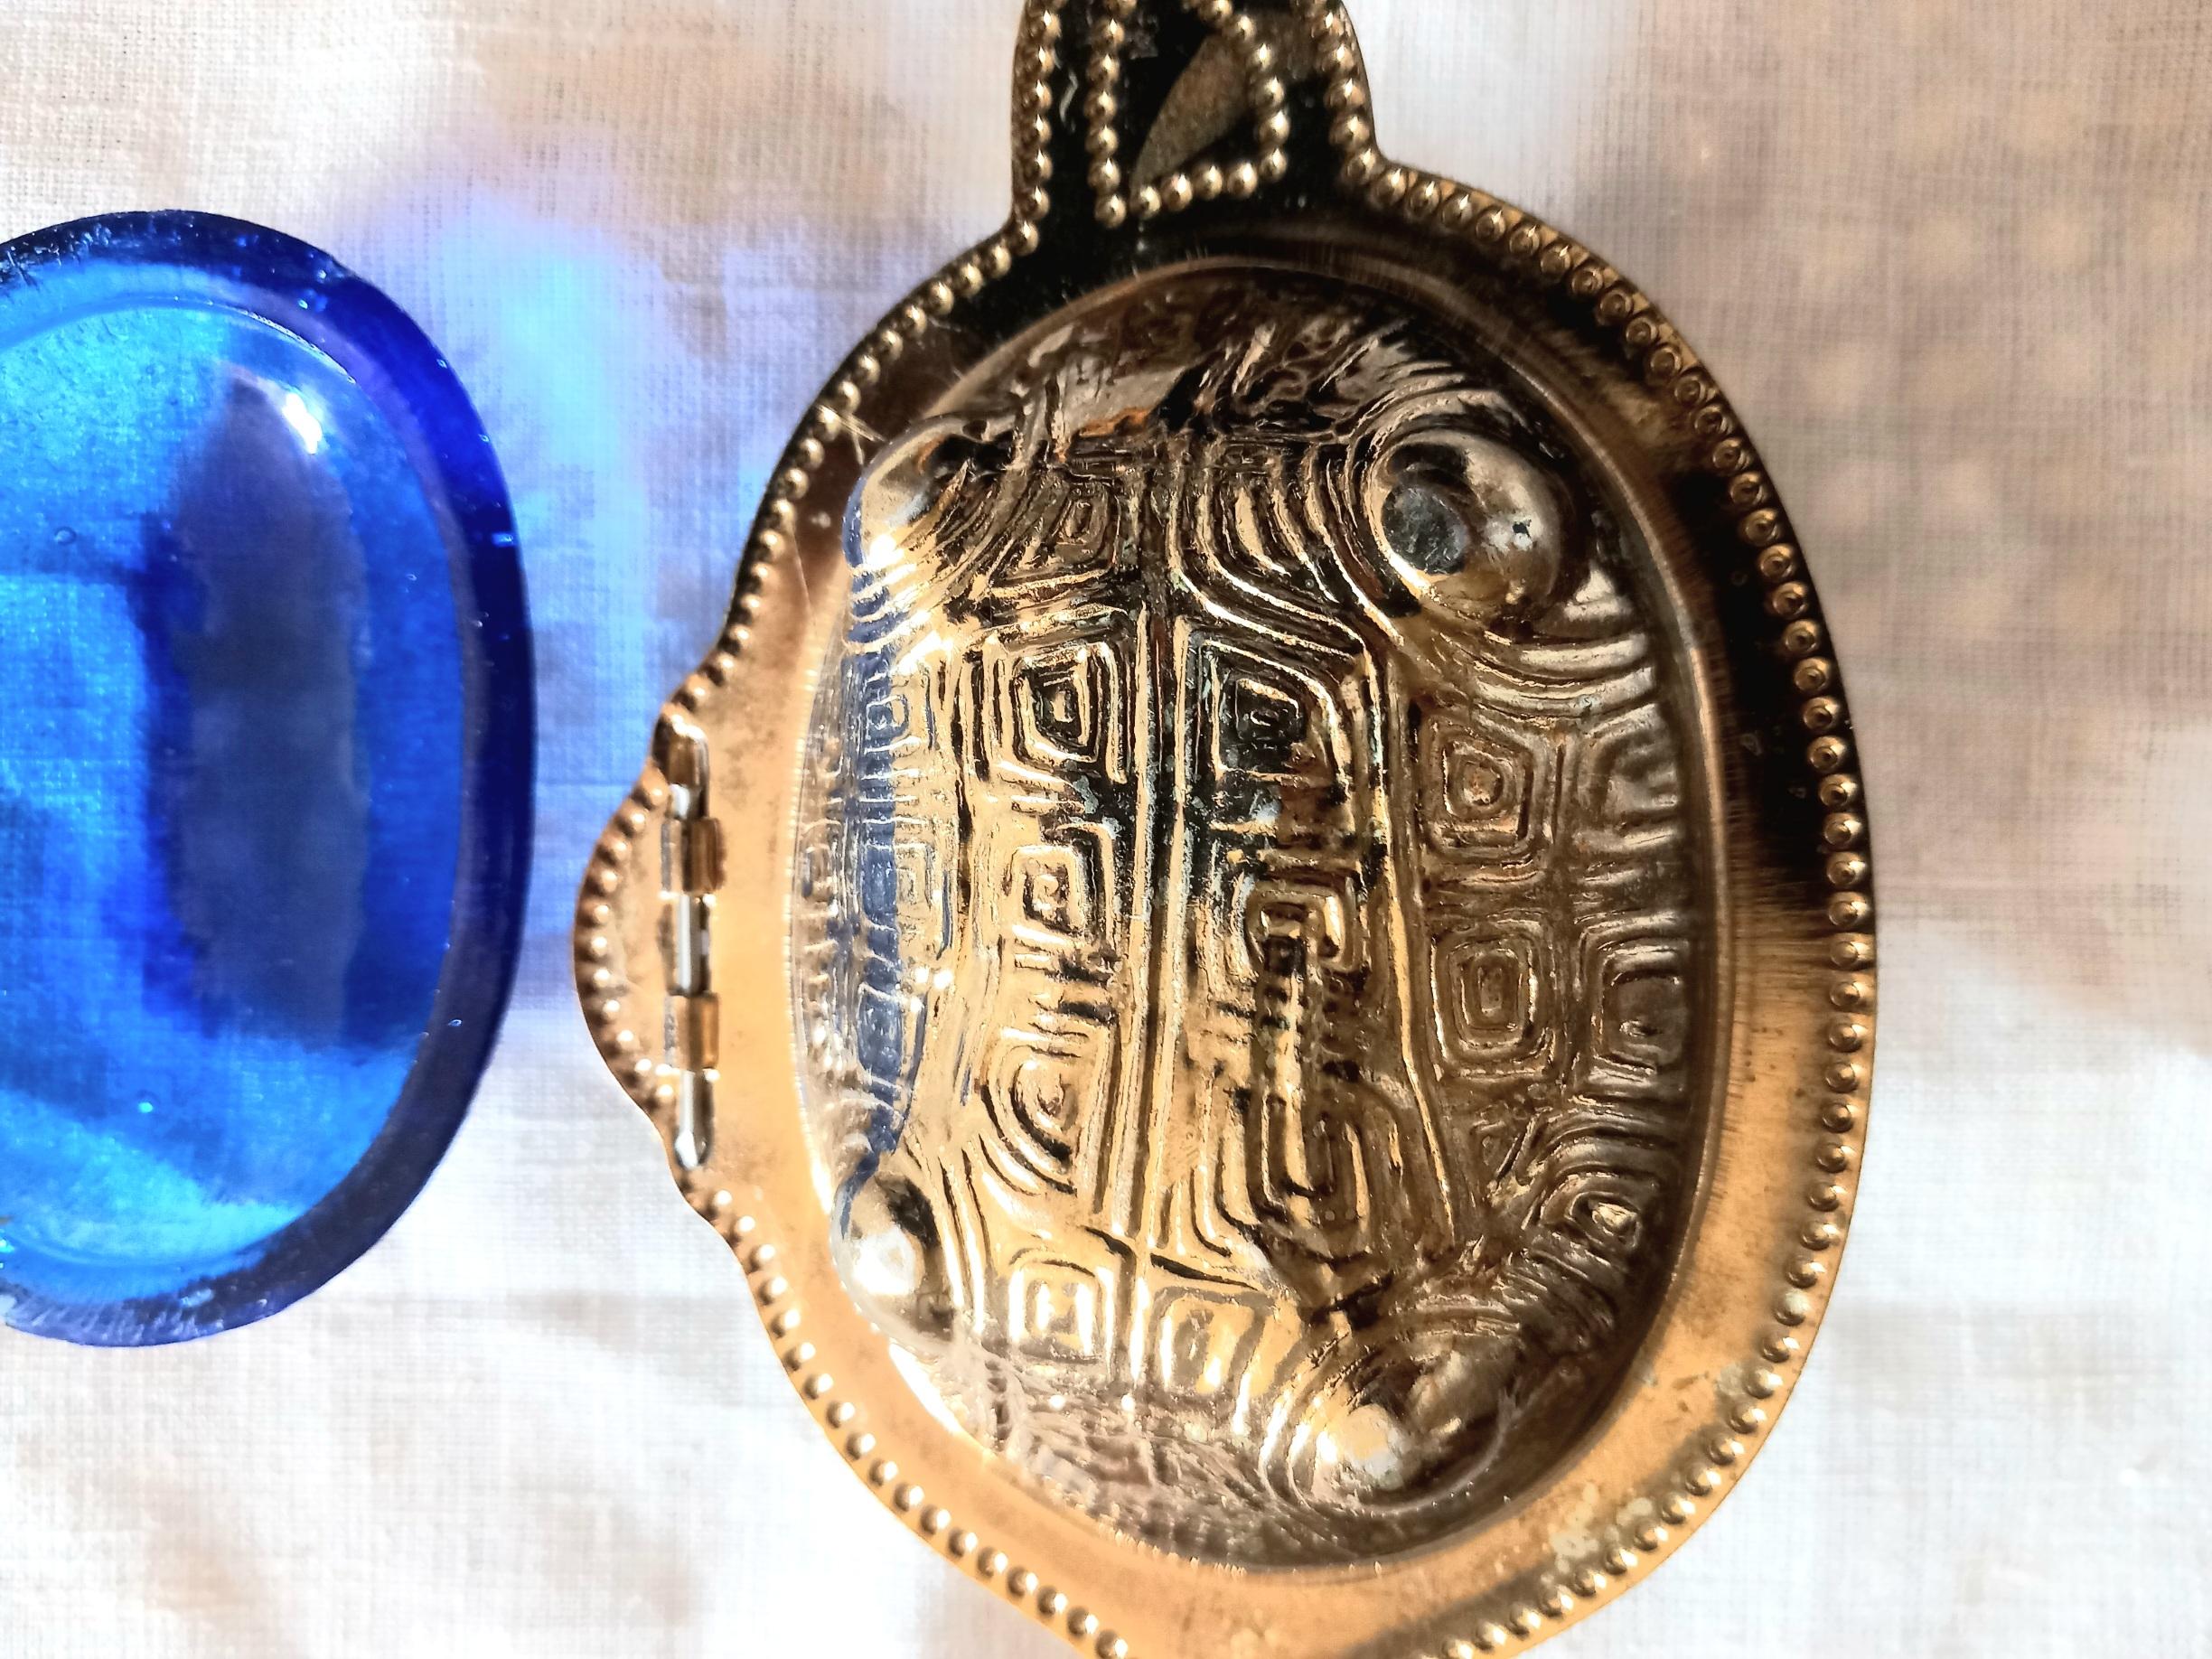 Italian Serve Caviar in The Shape of a Brass Turtle and Blue Murano Glass Vintage. Italy